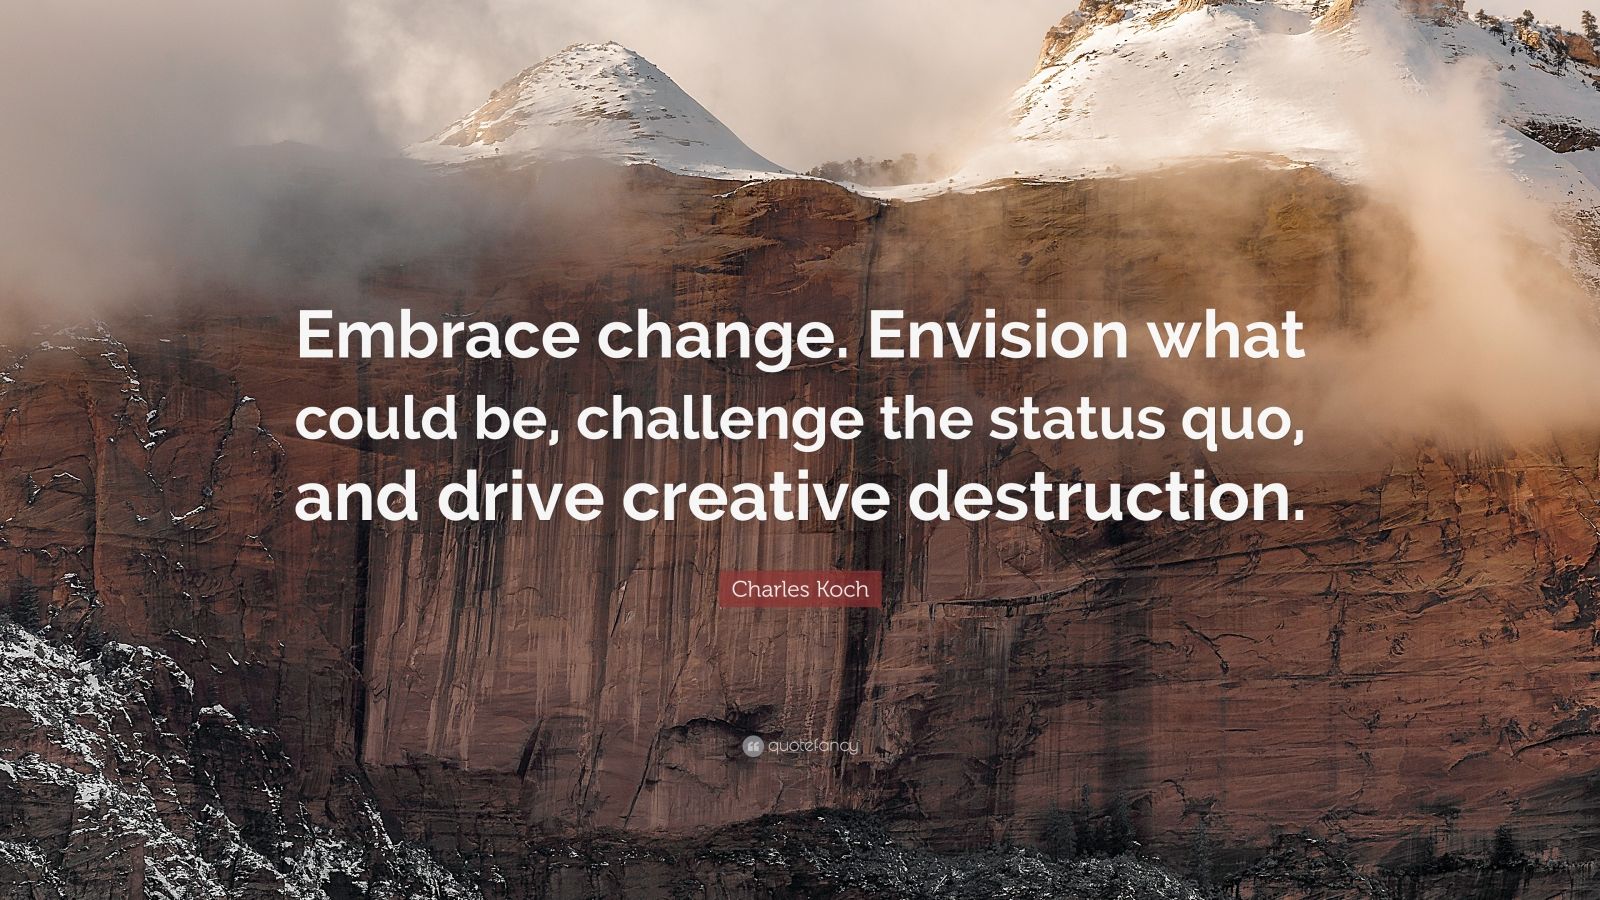 4878321 Charles Koch Quote Embrace change Envision what could be challenge